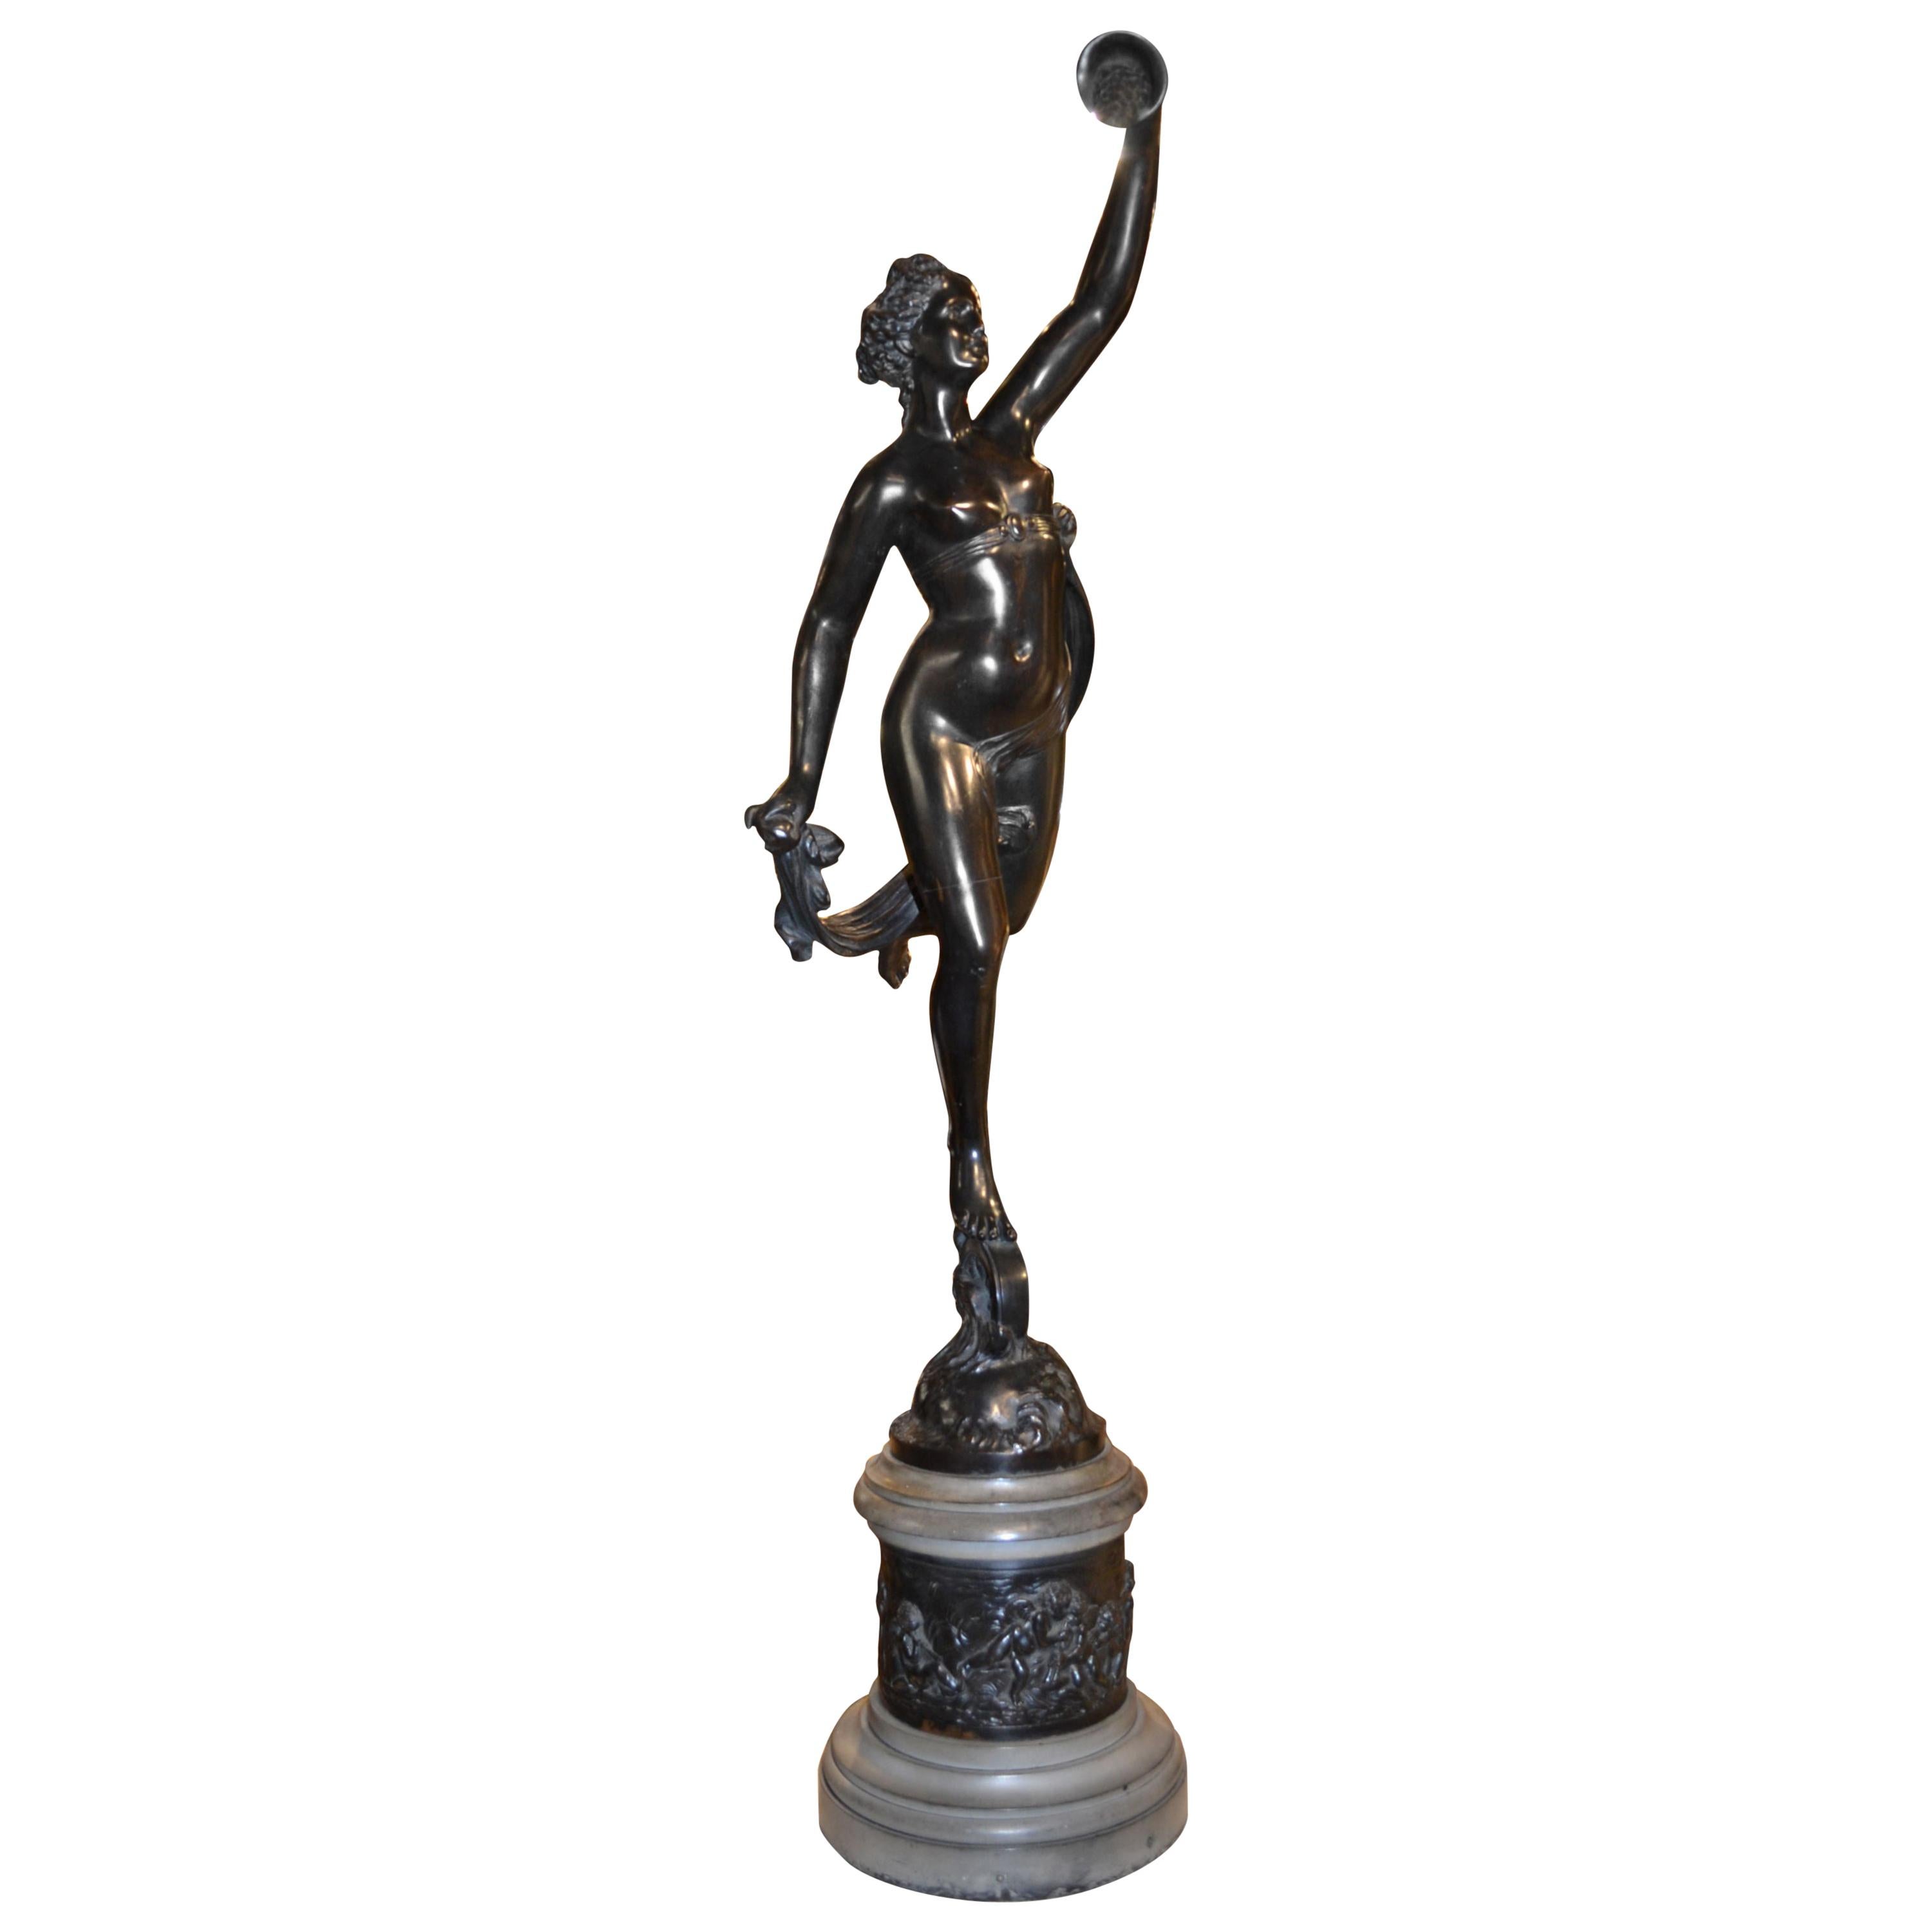 Very large Italian Grand tour bronze statue of Fortuna after a model by Giovanni Bologna on a marble base

Fortuna (Latin: Fortuna, equivalent to the Greek goddess Tyche) is the goddess of fortune and the personification of luck in Roman religion